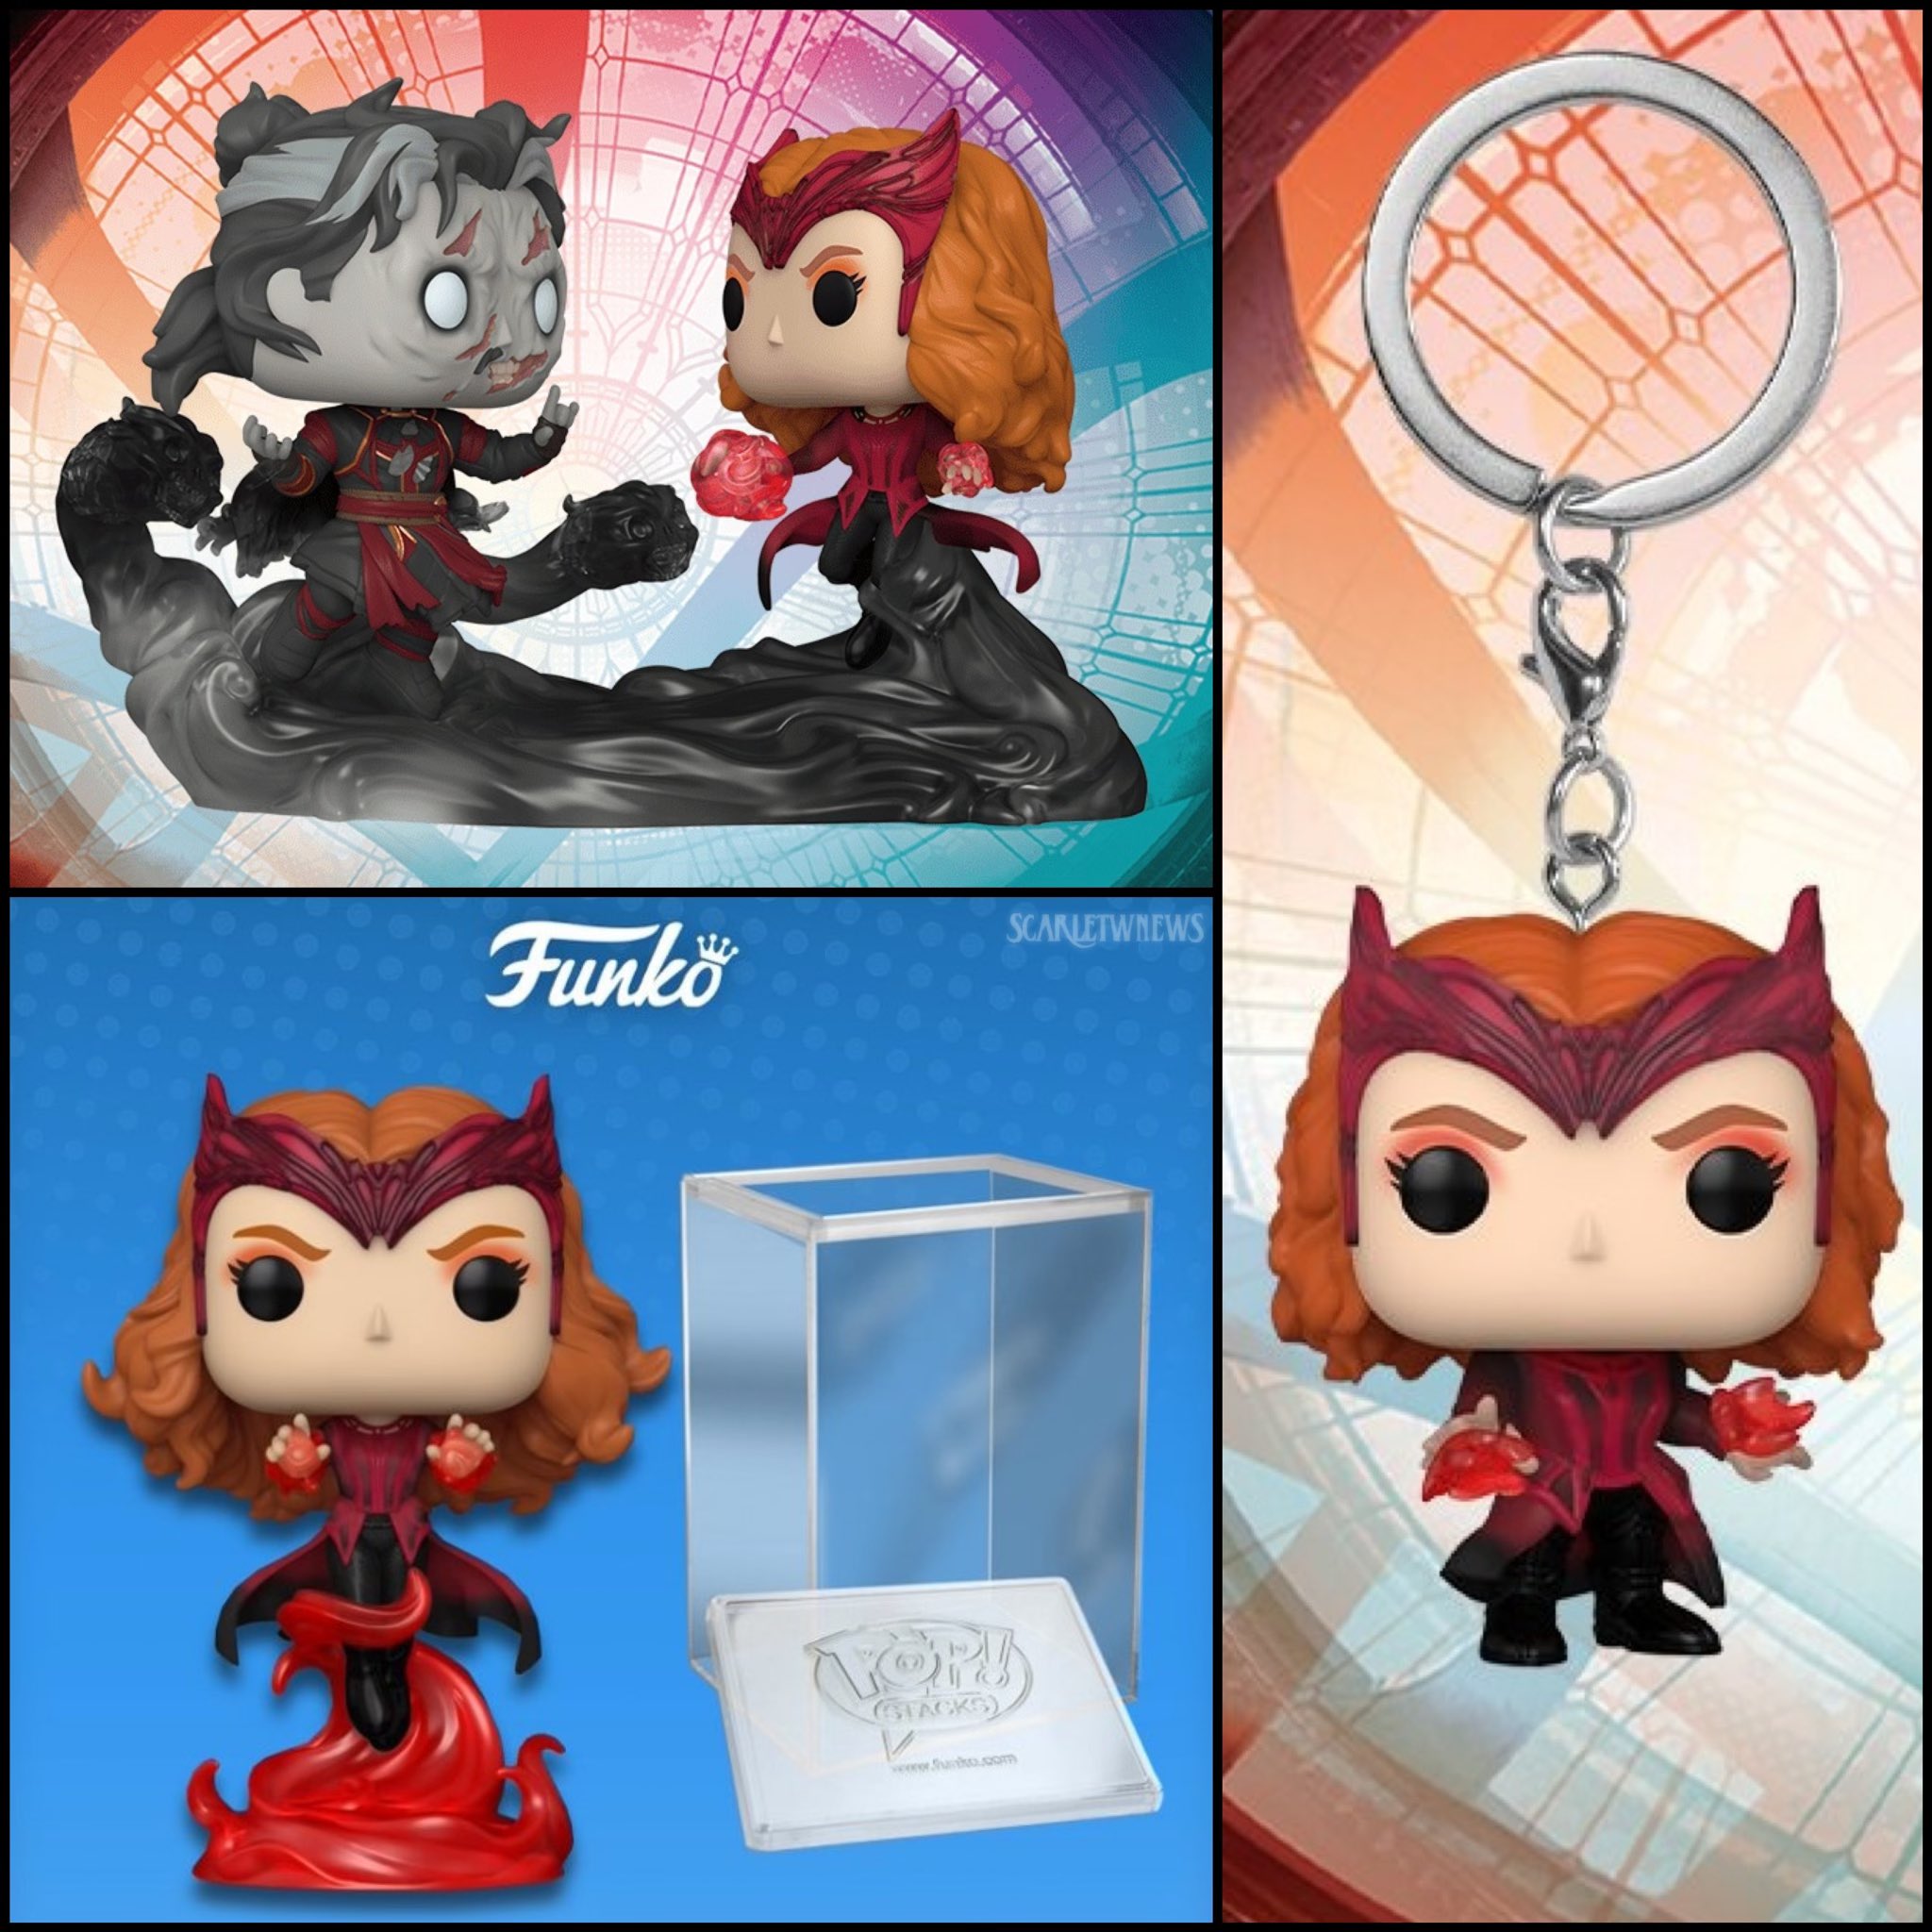 Scarlet Witch News on Twitter: "New #ScarletWitch Funko Pops from  #MultiverseOfMadness have been revealed! Scarlet Witch Keychain:  https://t.co/rhLmbhzEaN Scarlet Witch Funko Pop: https://t.co/ujiie0nHjX  Wanda/Zombie Strange: https://t.co/6EeeLbycsN ...